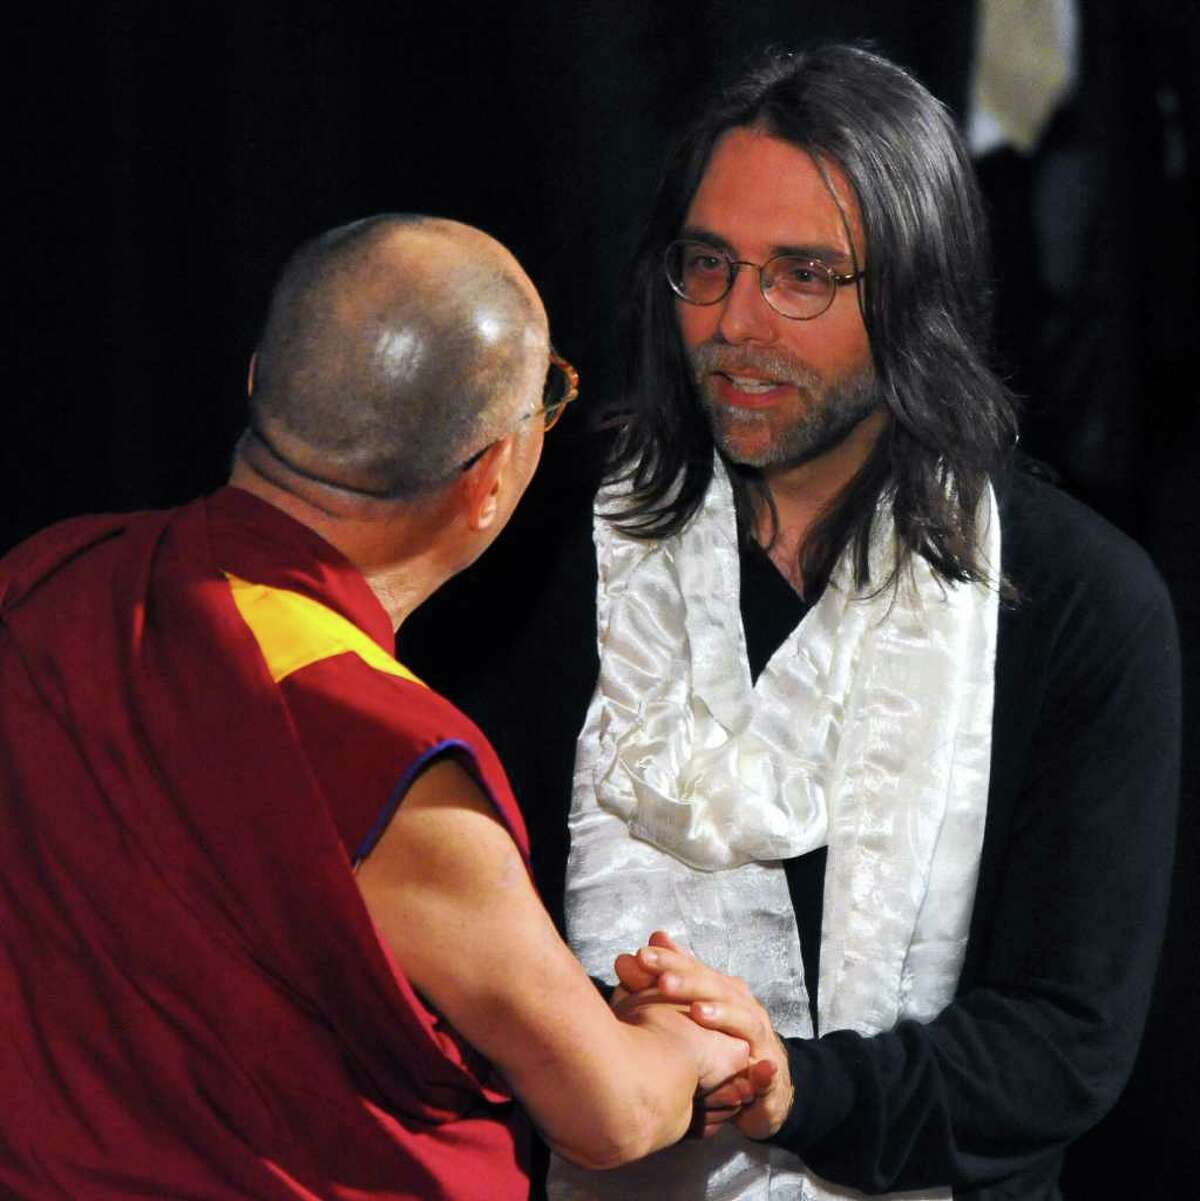 The Dalai Lama speaks onstage with Keith Raniere, right, co-founder of Executive Success Programs, Inc. (ESP), after giving him a Tibetan scarf following his talk at the Palace Theatre, in Albany, N.Y., Wed., May 6, 2009. (Philip Kamrass / Times Union)